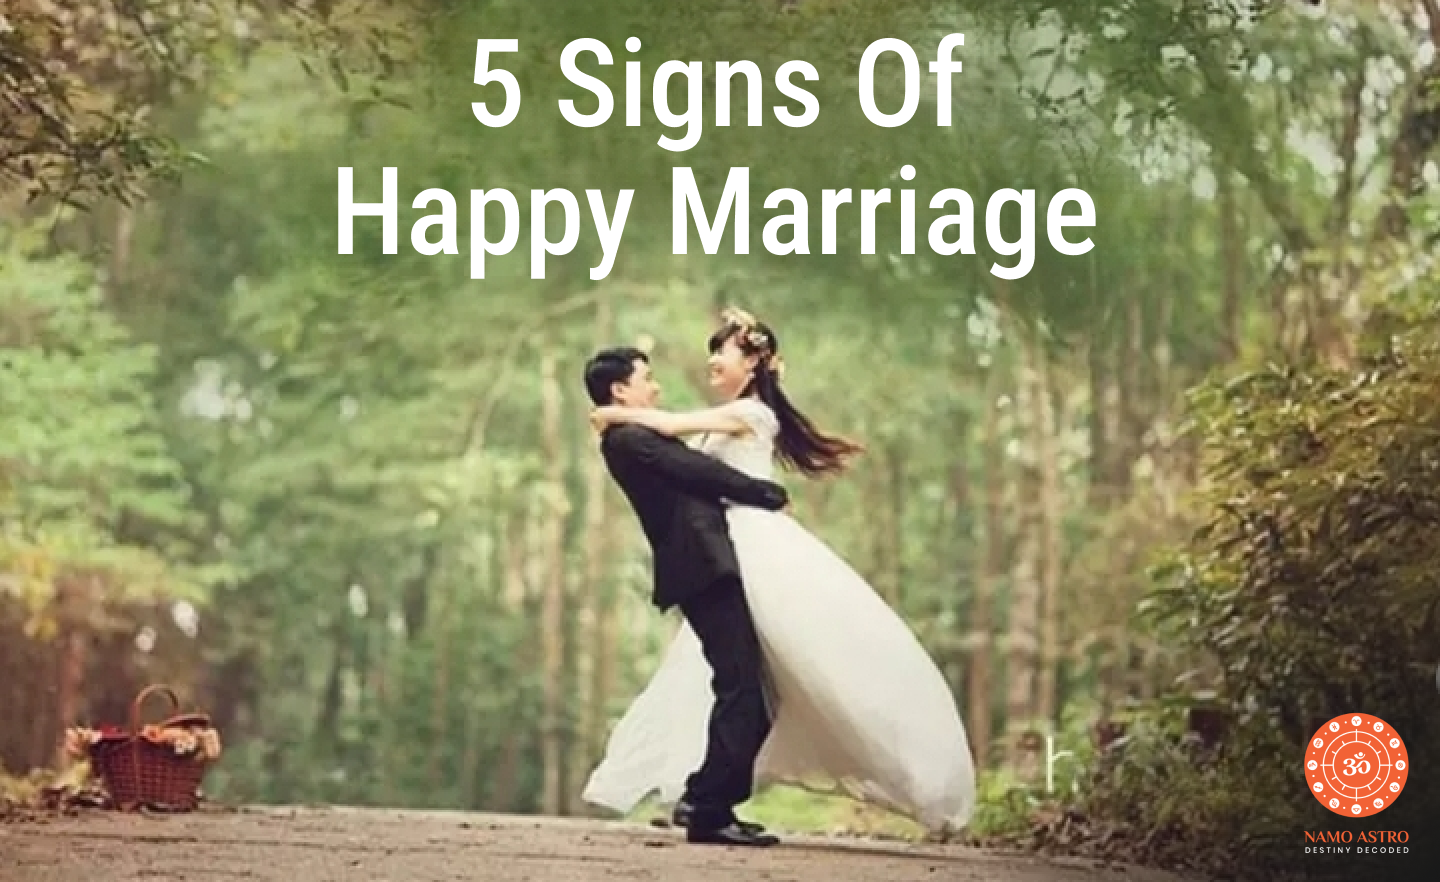 5 signs of happy marriage